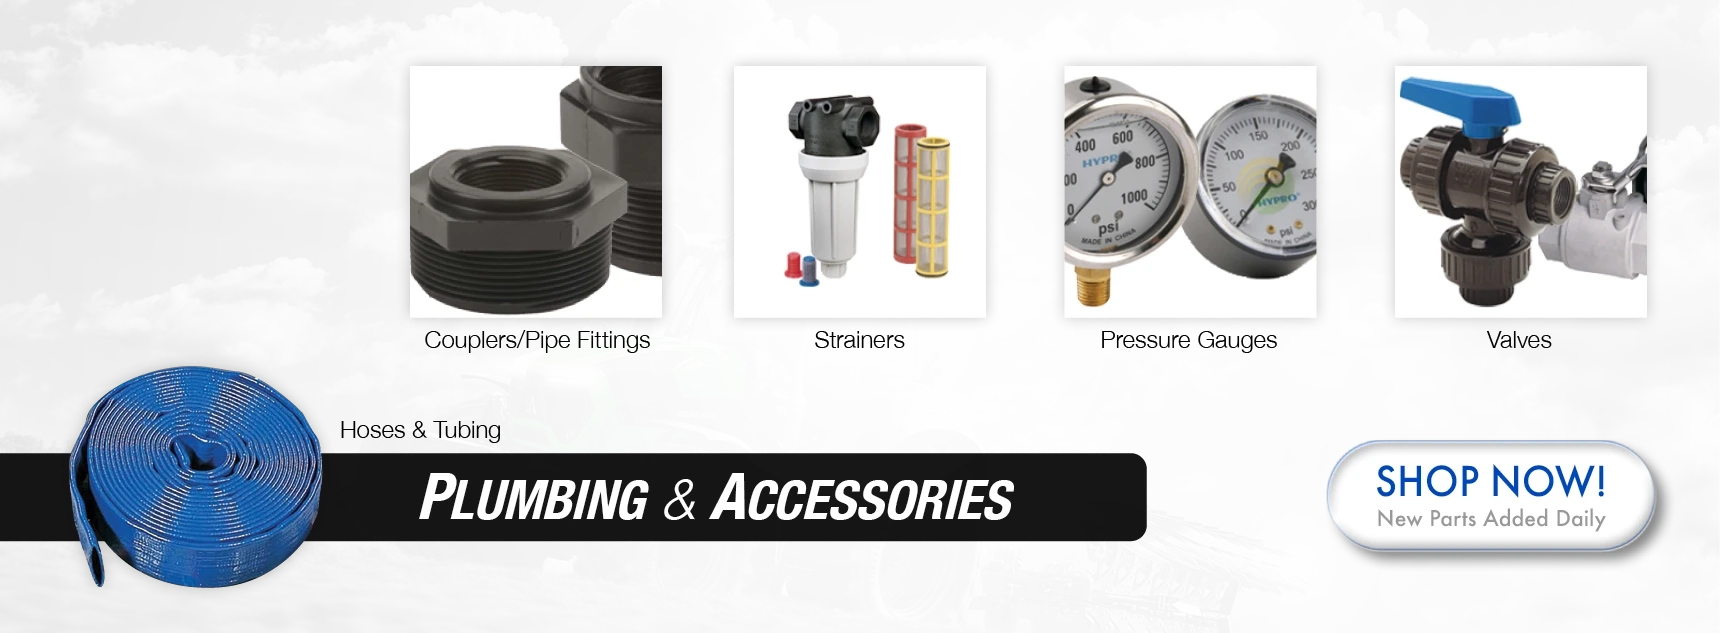 Plumbing Accessories: Couplers, Valves, Hose, Tubing, Strainers, Valves, Fittings, Gauges